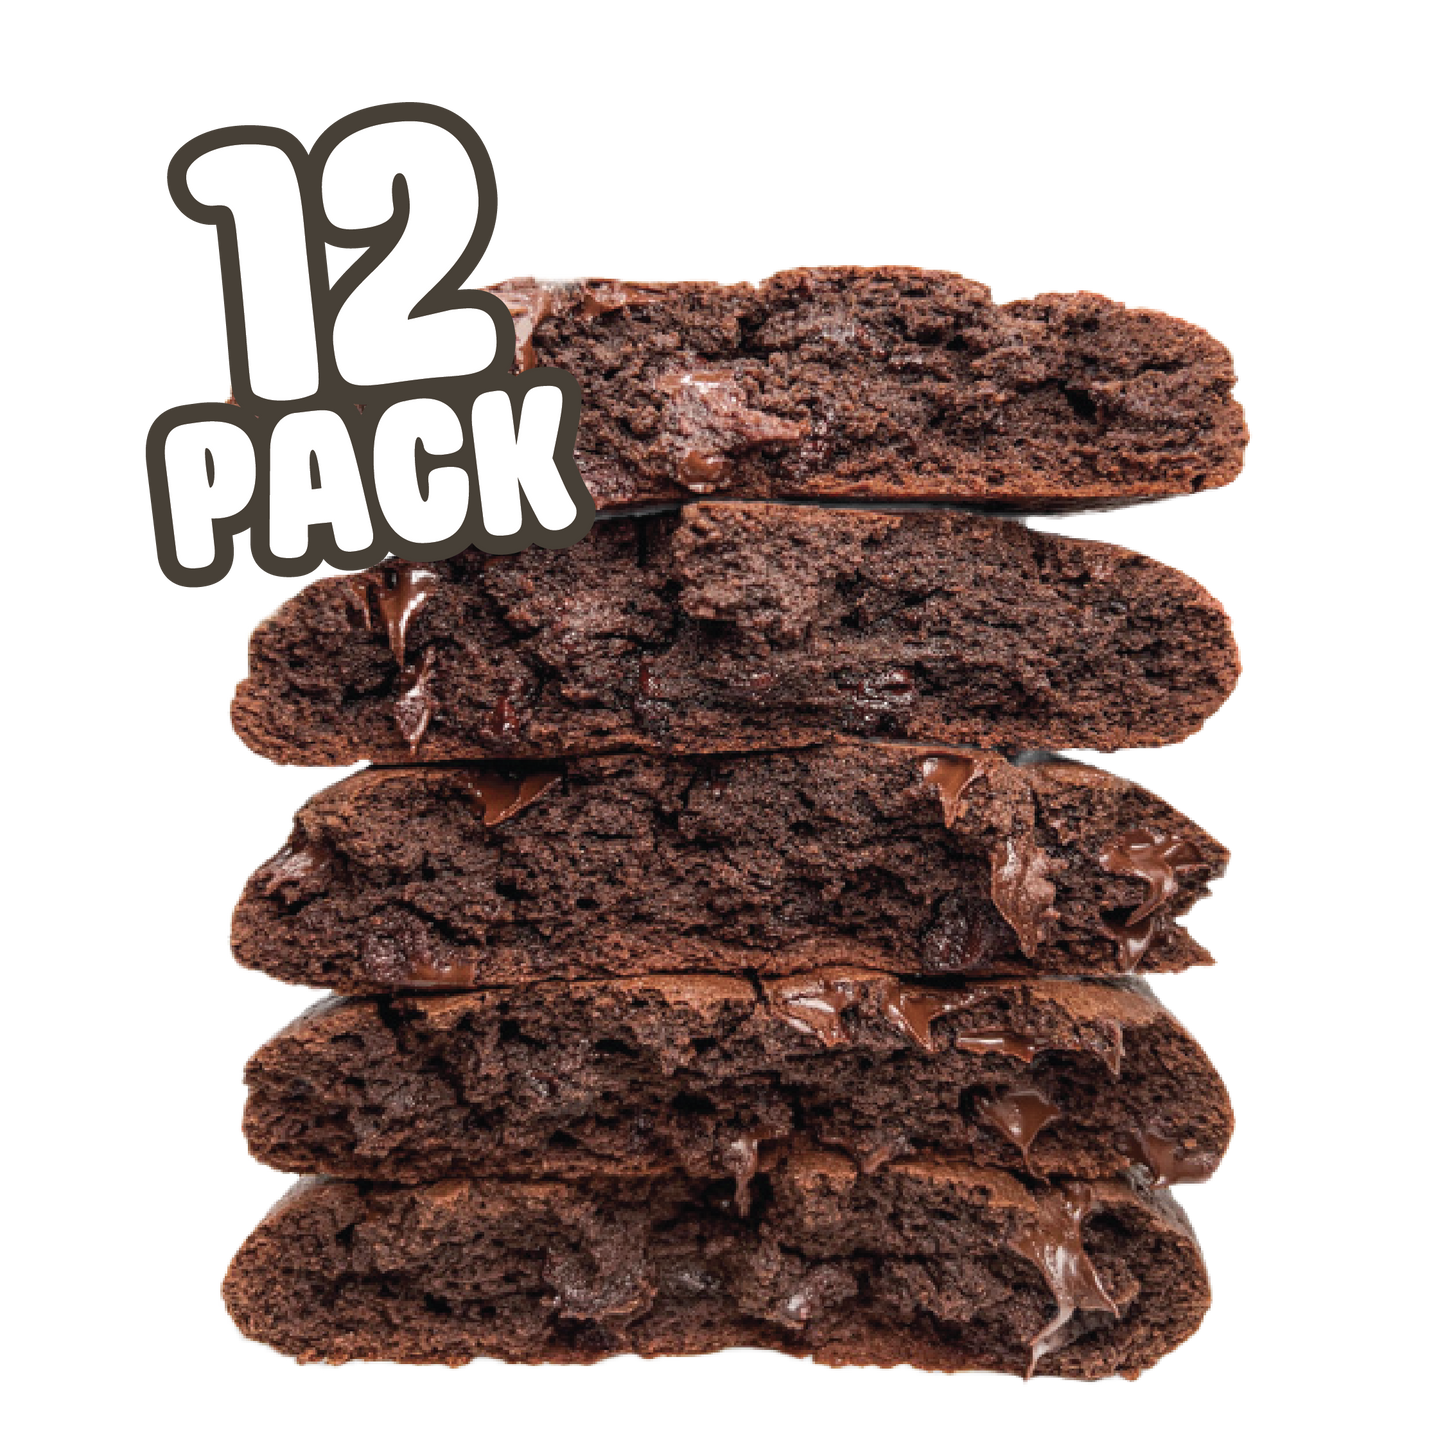 Double Chocolate Protein Cookie